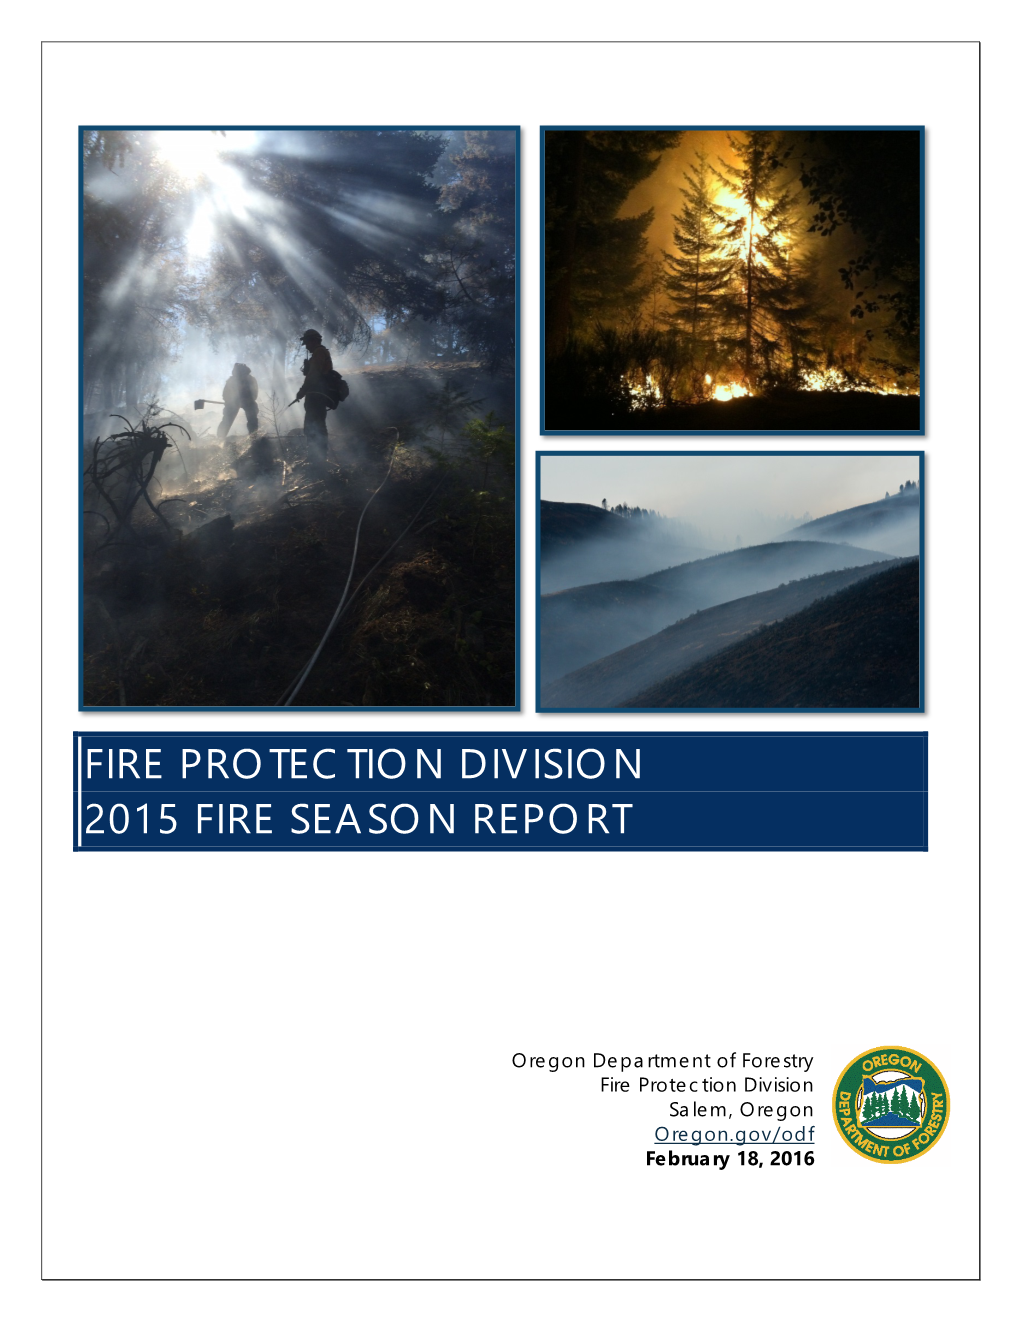 Fire Protection Division 2015 Fire Season Report